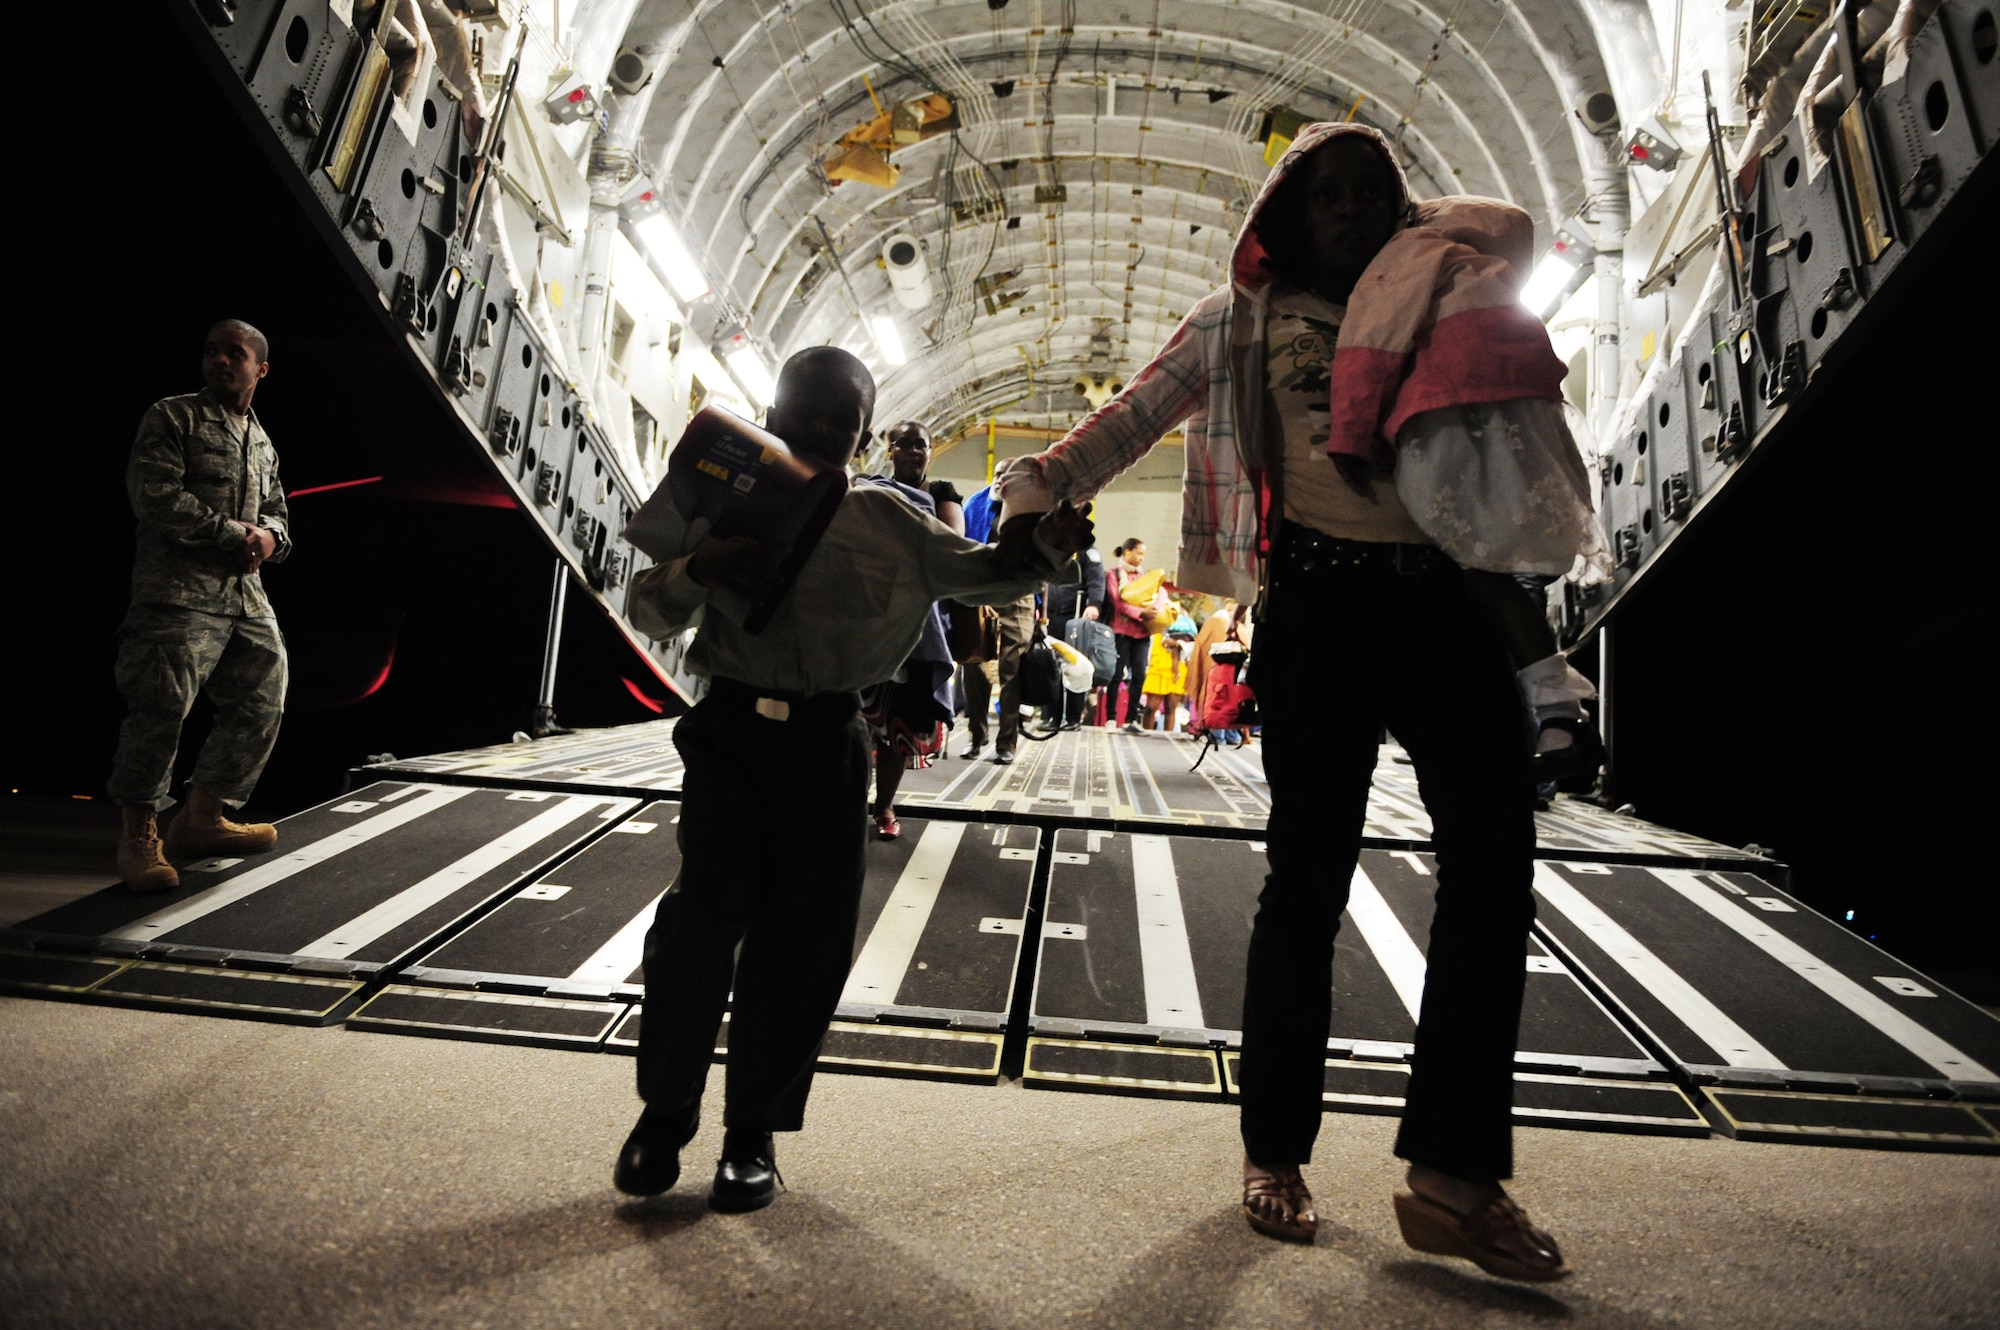 Haitian-American evacuees exit a C-17 Globemaster III Jan. 18, 2010, at Orlando Sanford International Airport, Fla. The C-17 crew is assigned to the 729th Airlift Squadron at March Air Reserve Base, Calif. The aircraft is from the 452nd Air Mobility Wing at March ARB. (U.S. Air Force photo/Staff Sgt. Jacob N. Bailey)